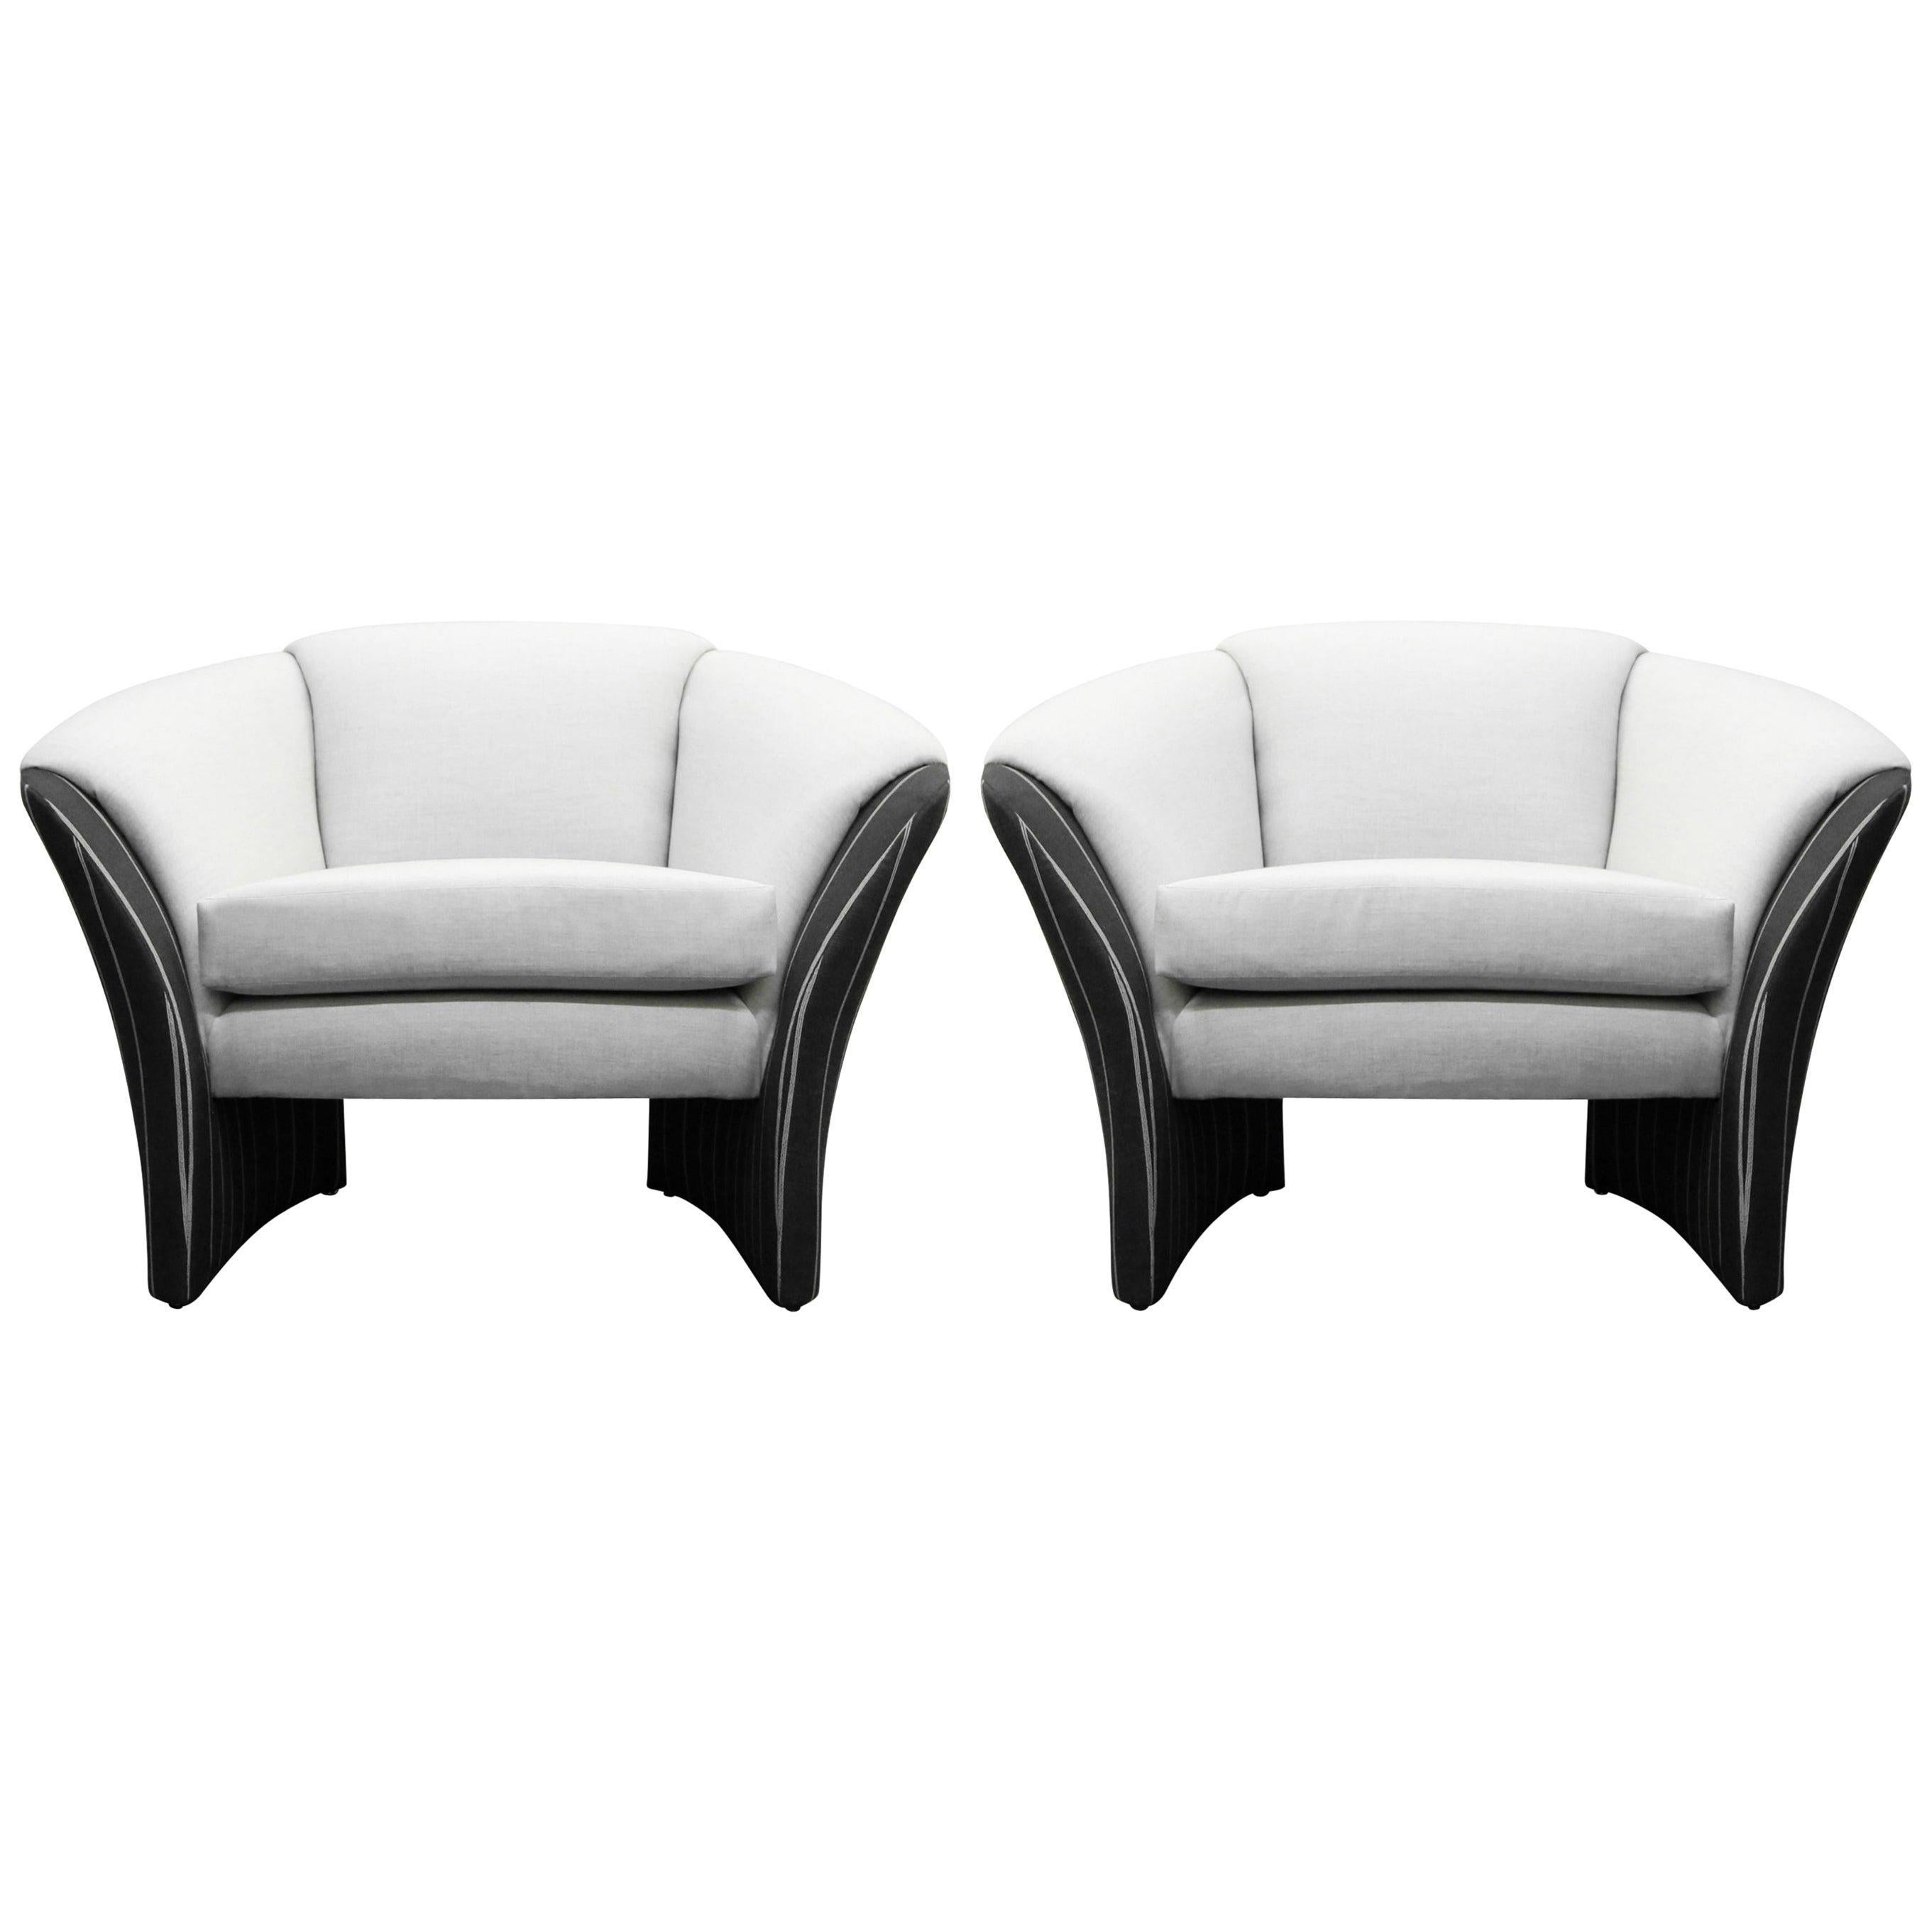 Pair of Oversized Barrel Back Italian Lounge Chairs with Splayed Arms